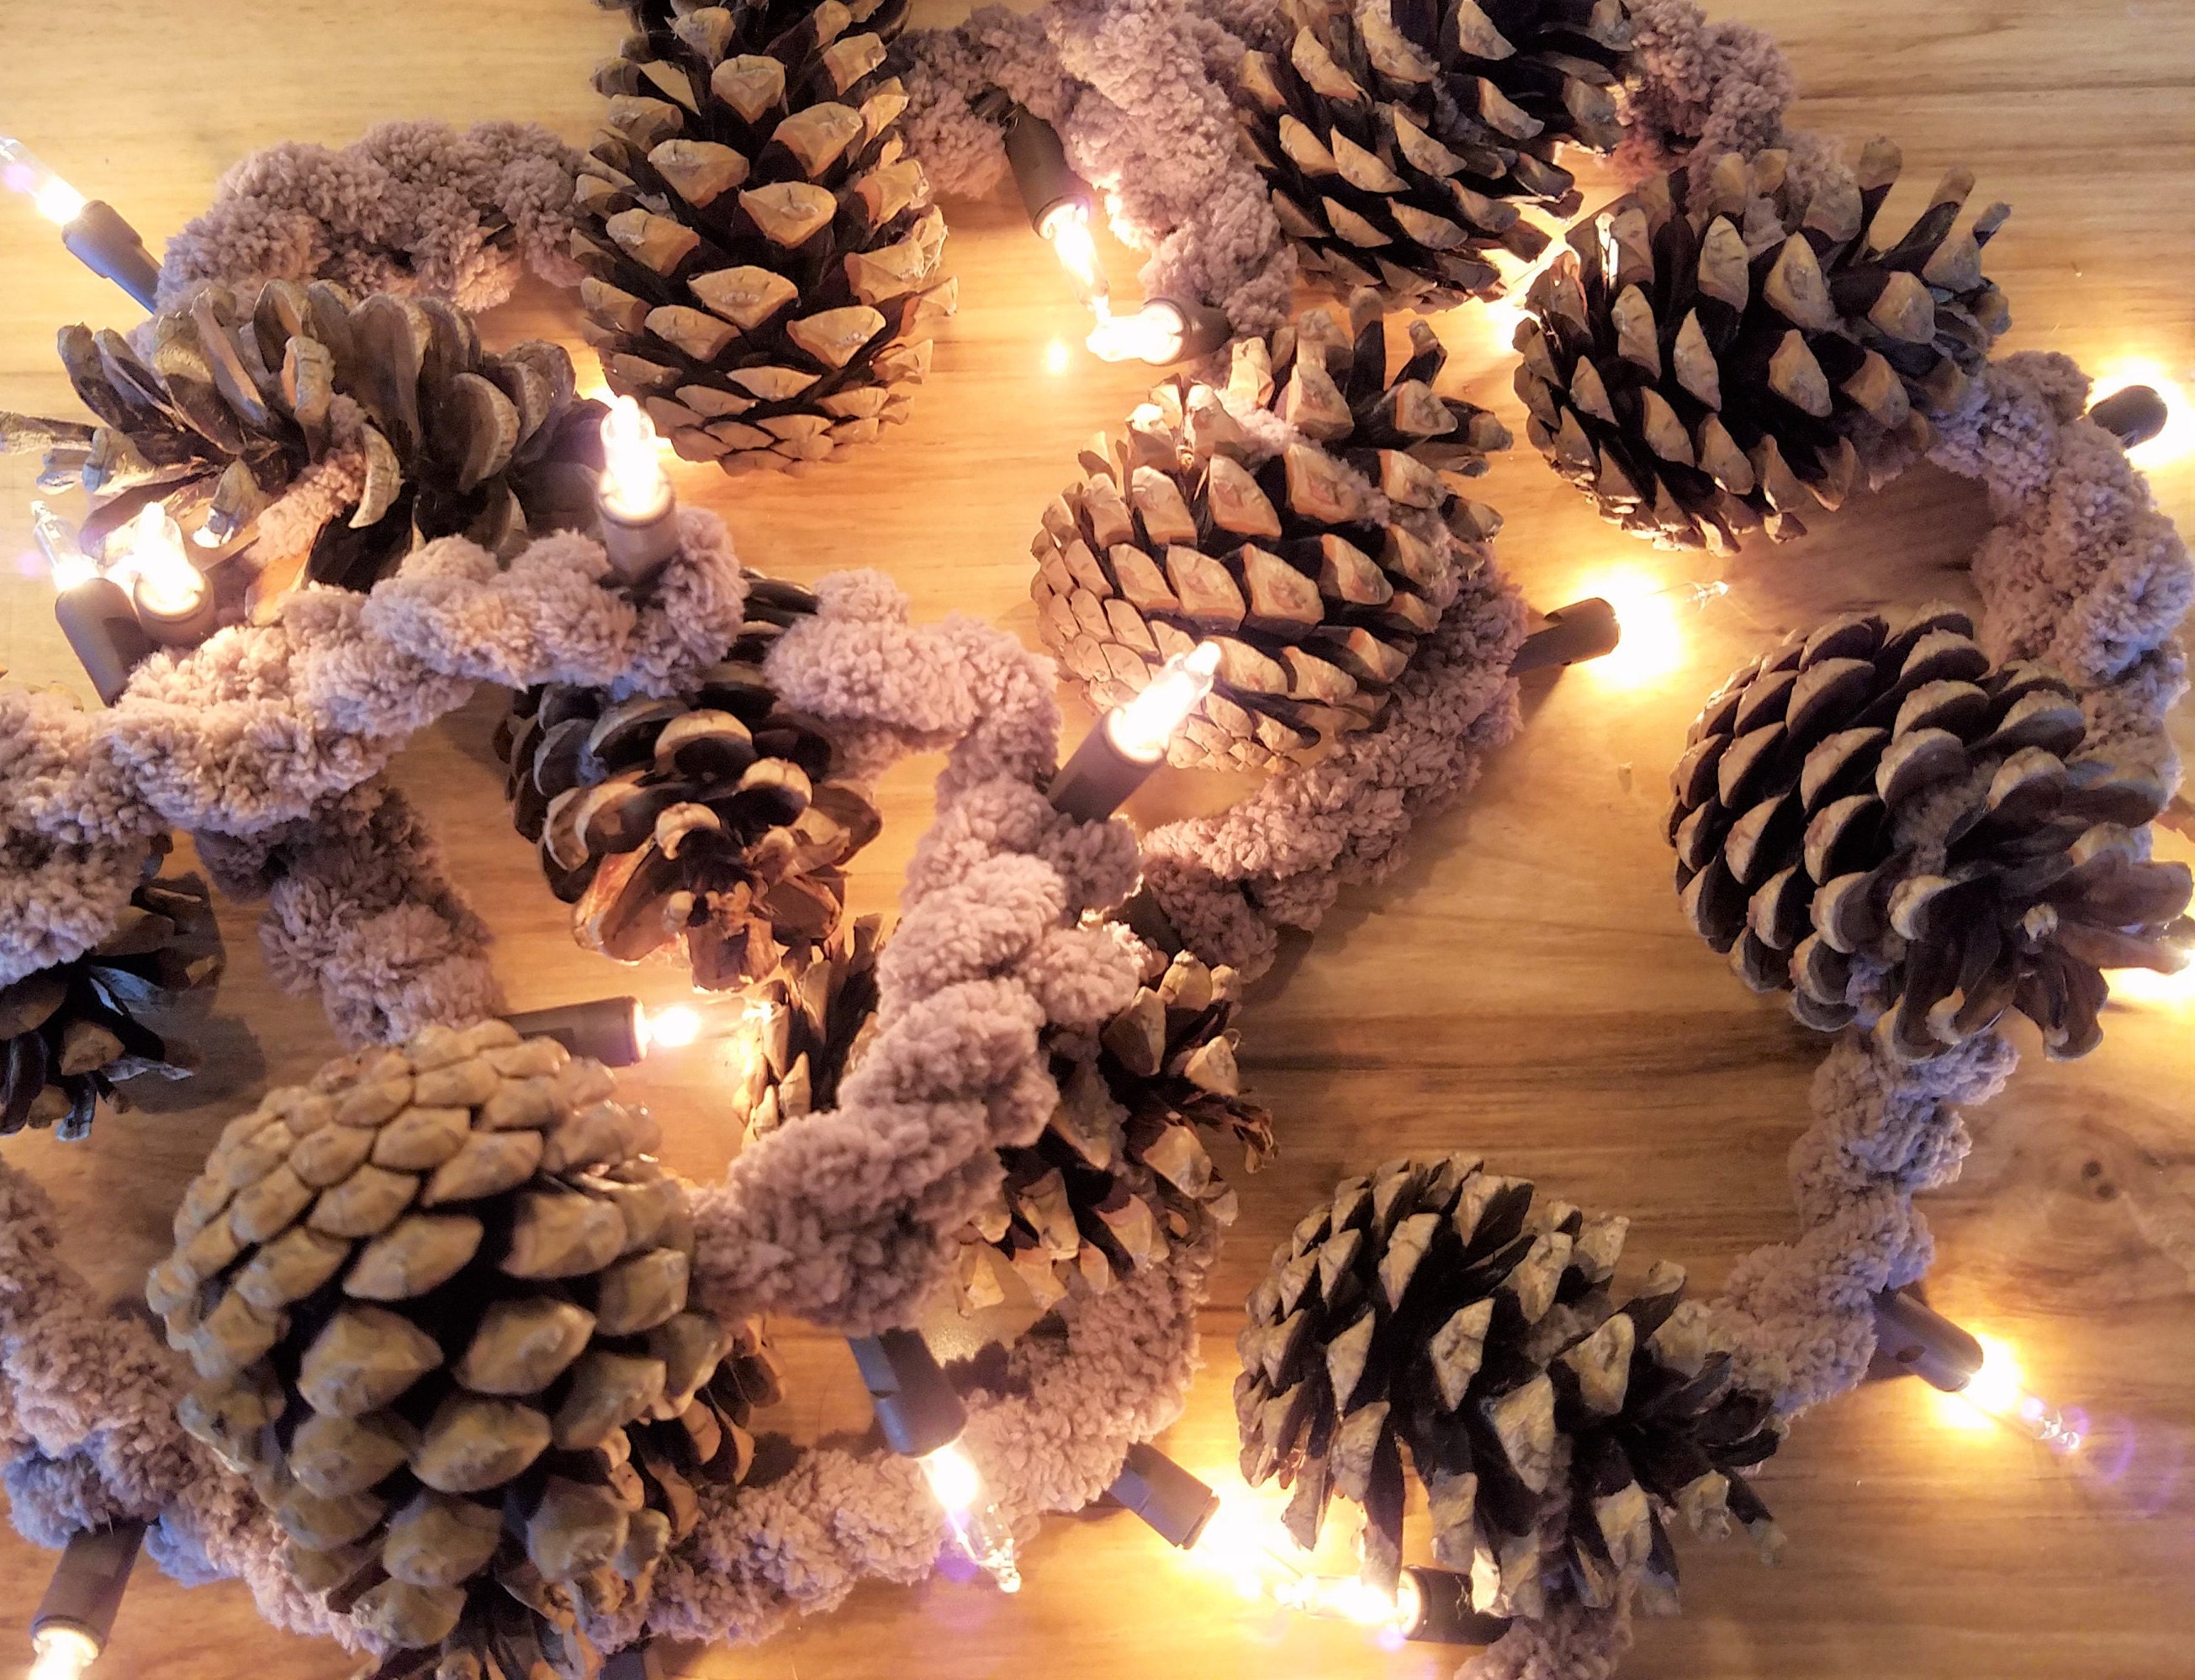 50PCS Pine Cones Nature Pinecones Ornaments for Christmas Tree Rustic  Christmas Ornaments Bulk Pinecones for Crafts Vase Fillers Thanksgiving